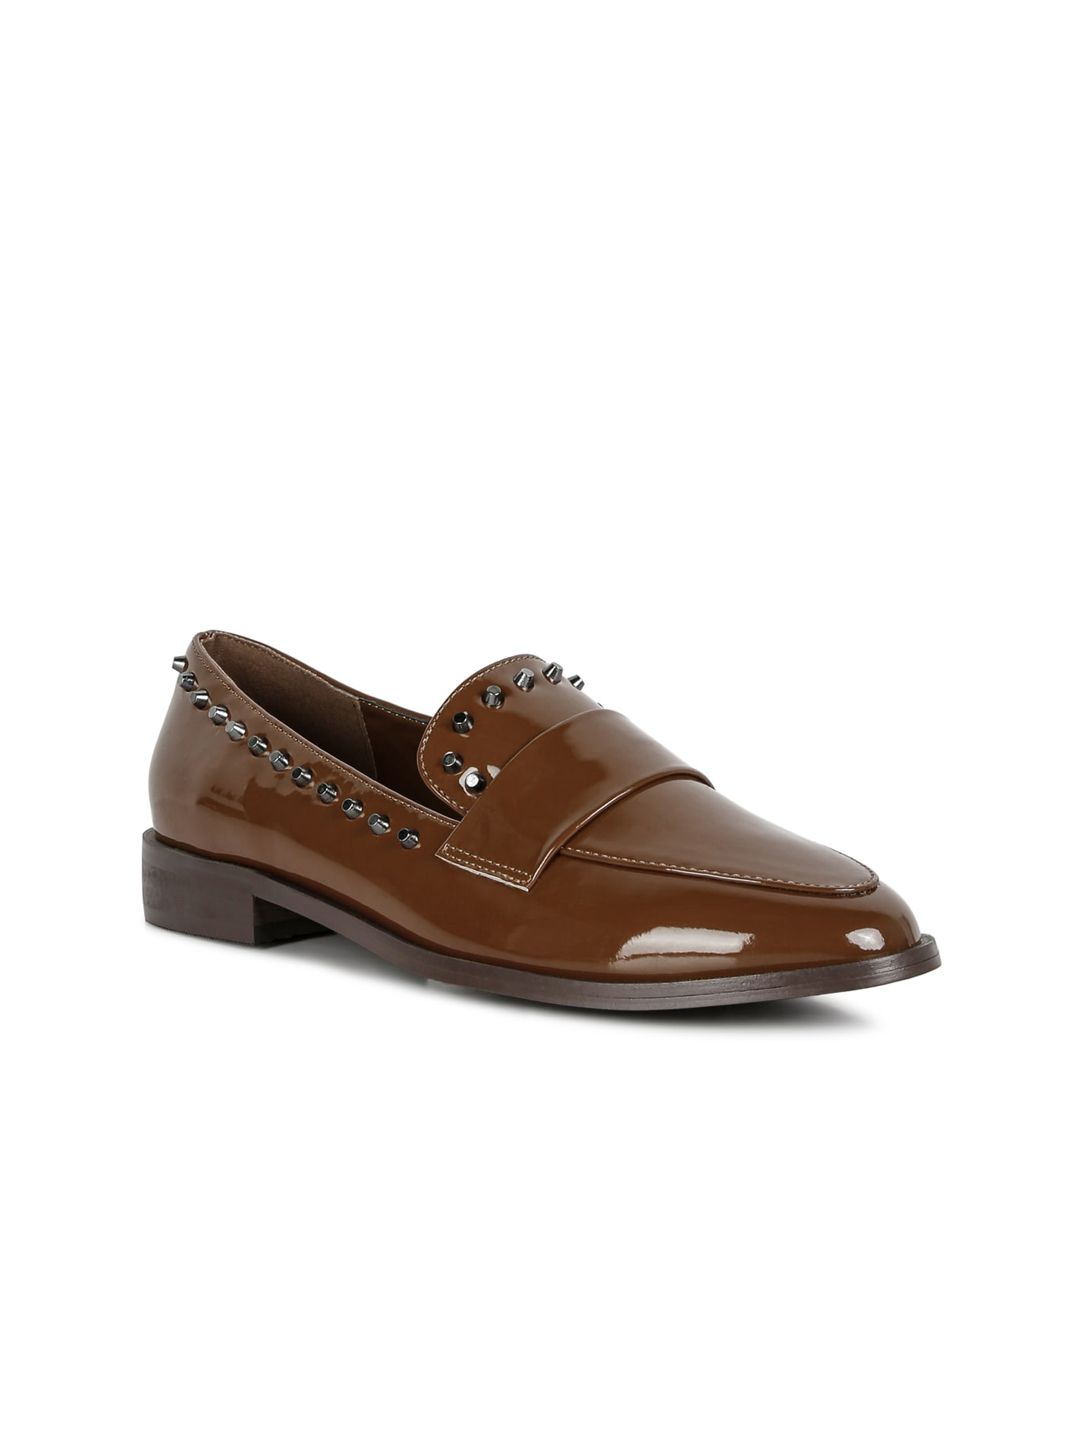 RAG & CO Women Patent Stud Penny Loafers Price in India